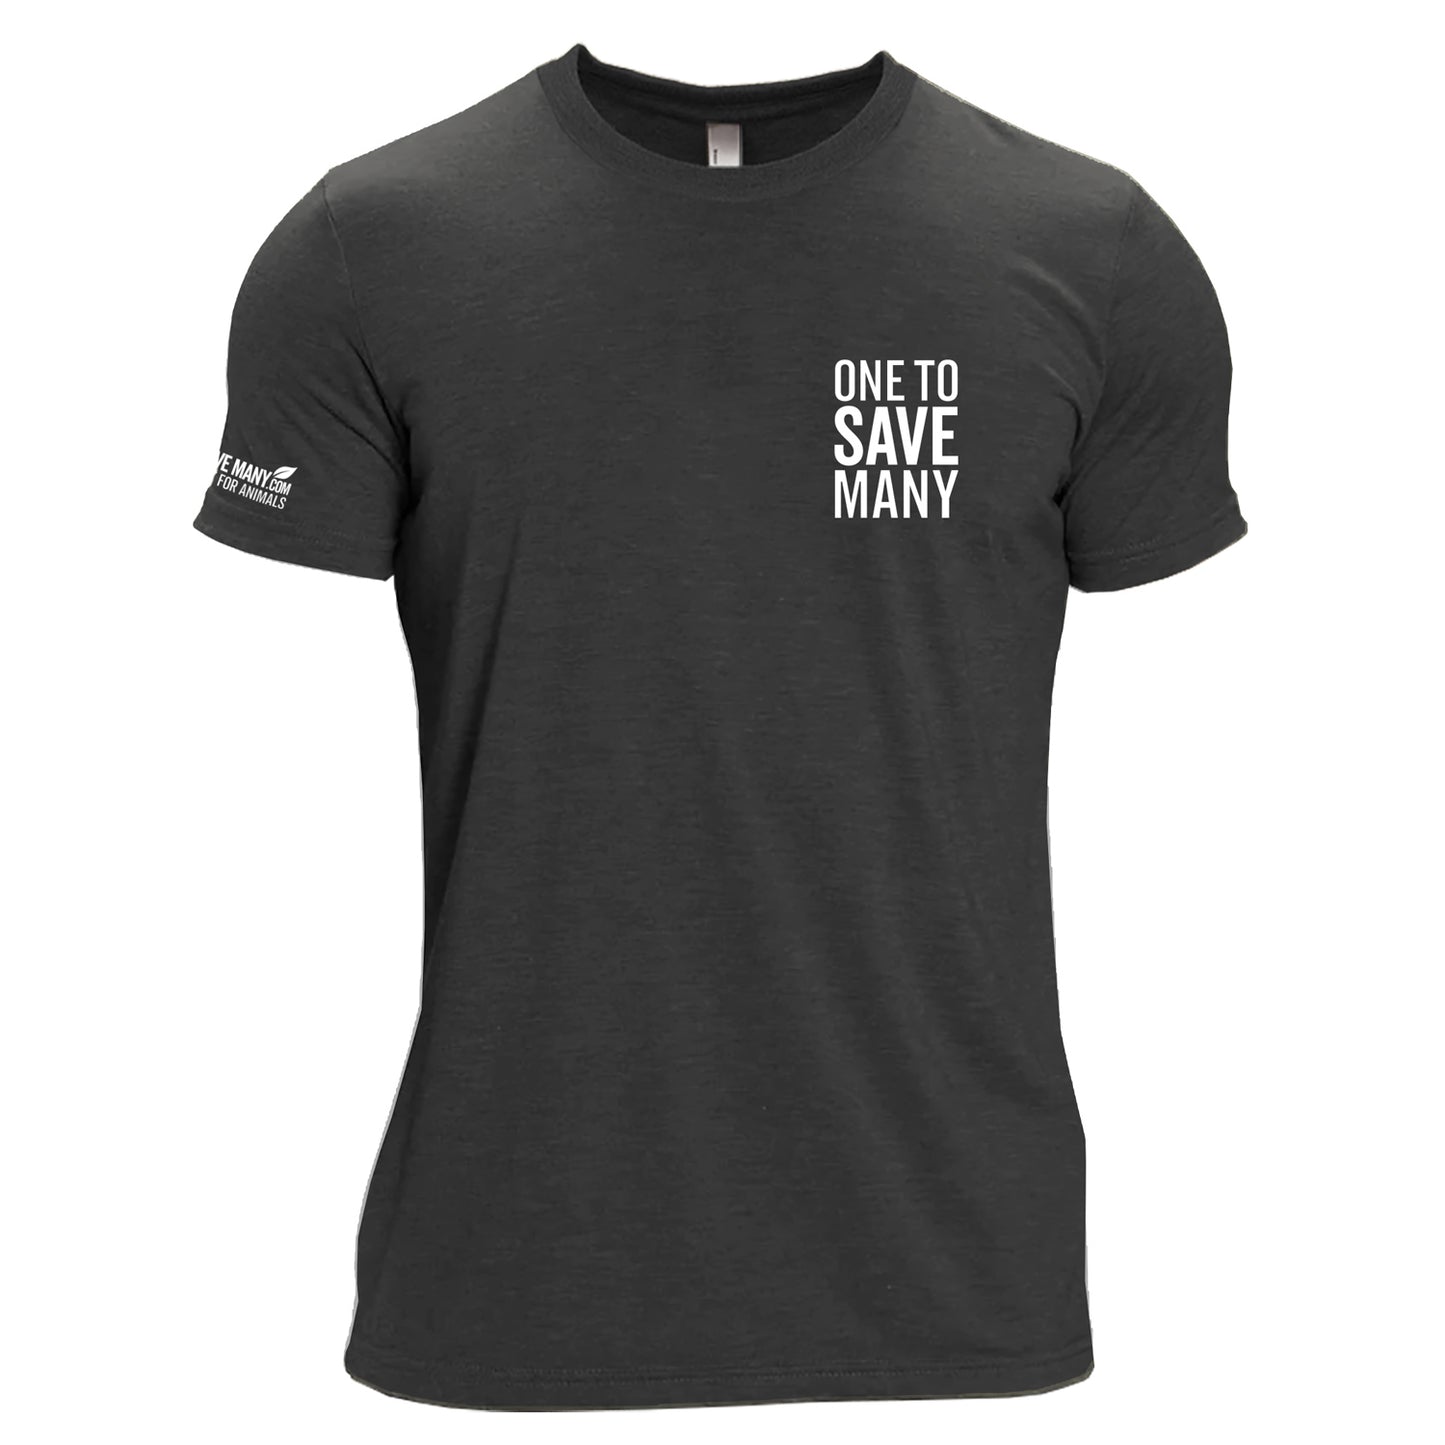 One to Save Many / Be Kind - Eat Plants - Lift Heavy Unisex Tri-Blend Black T-Shirt - 100% for Charity!